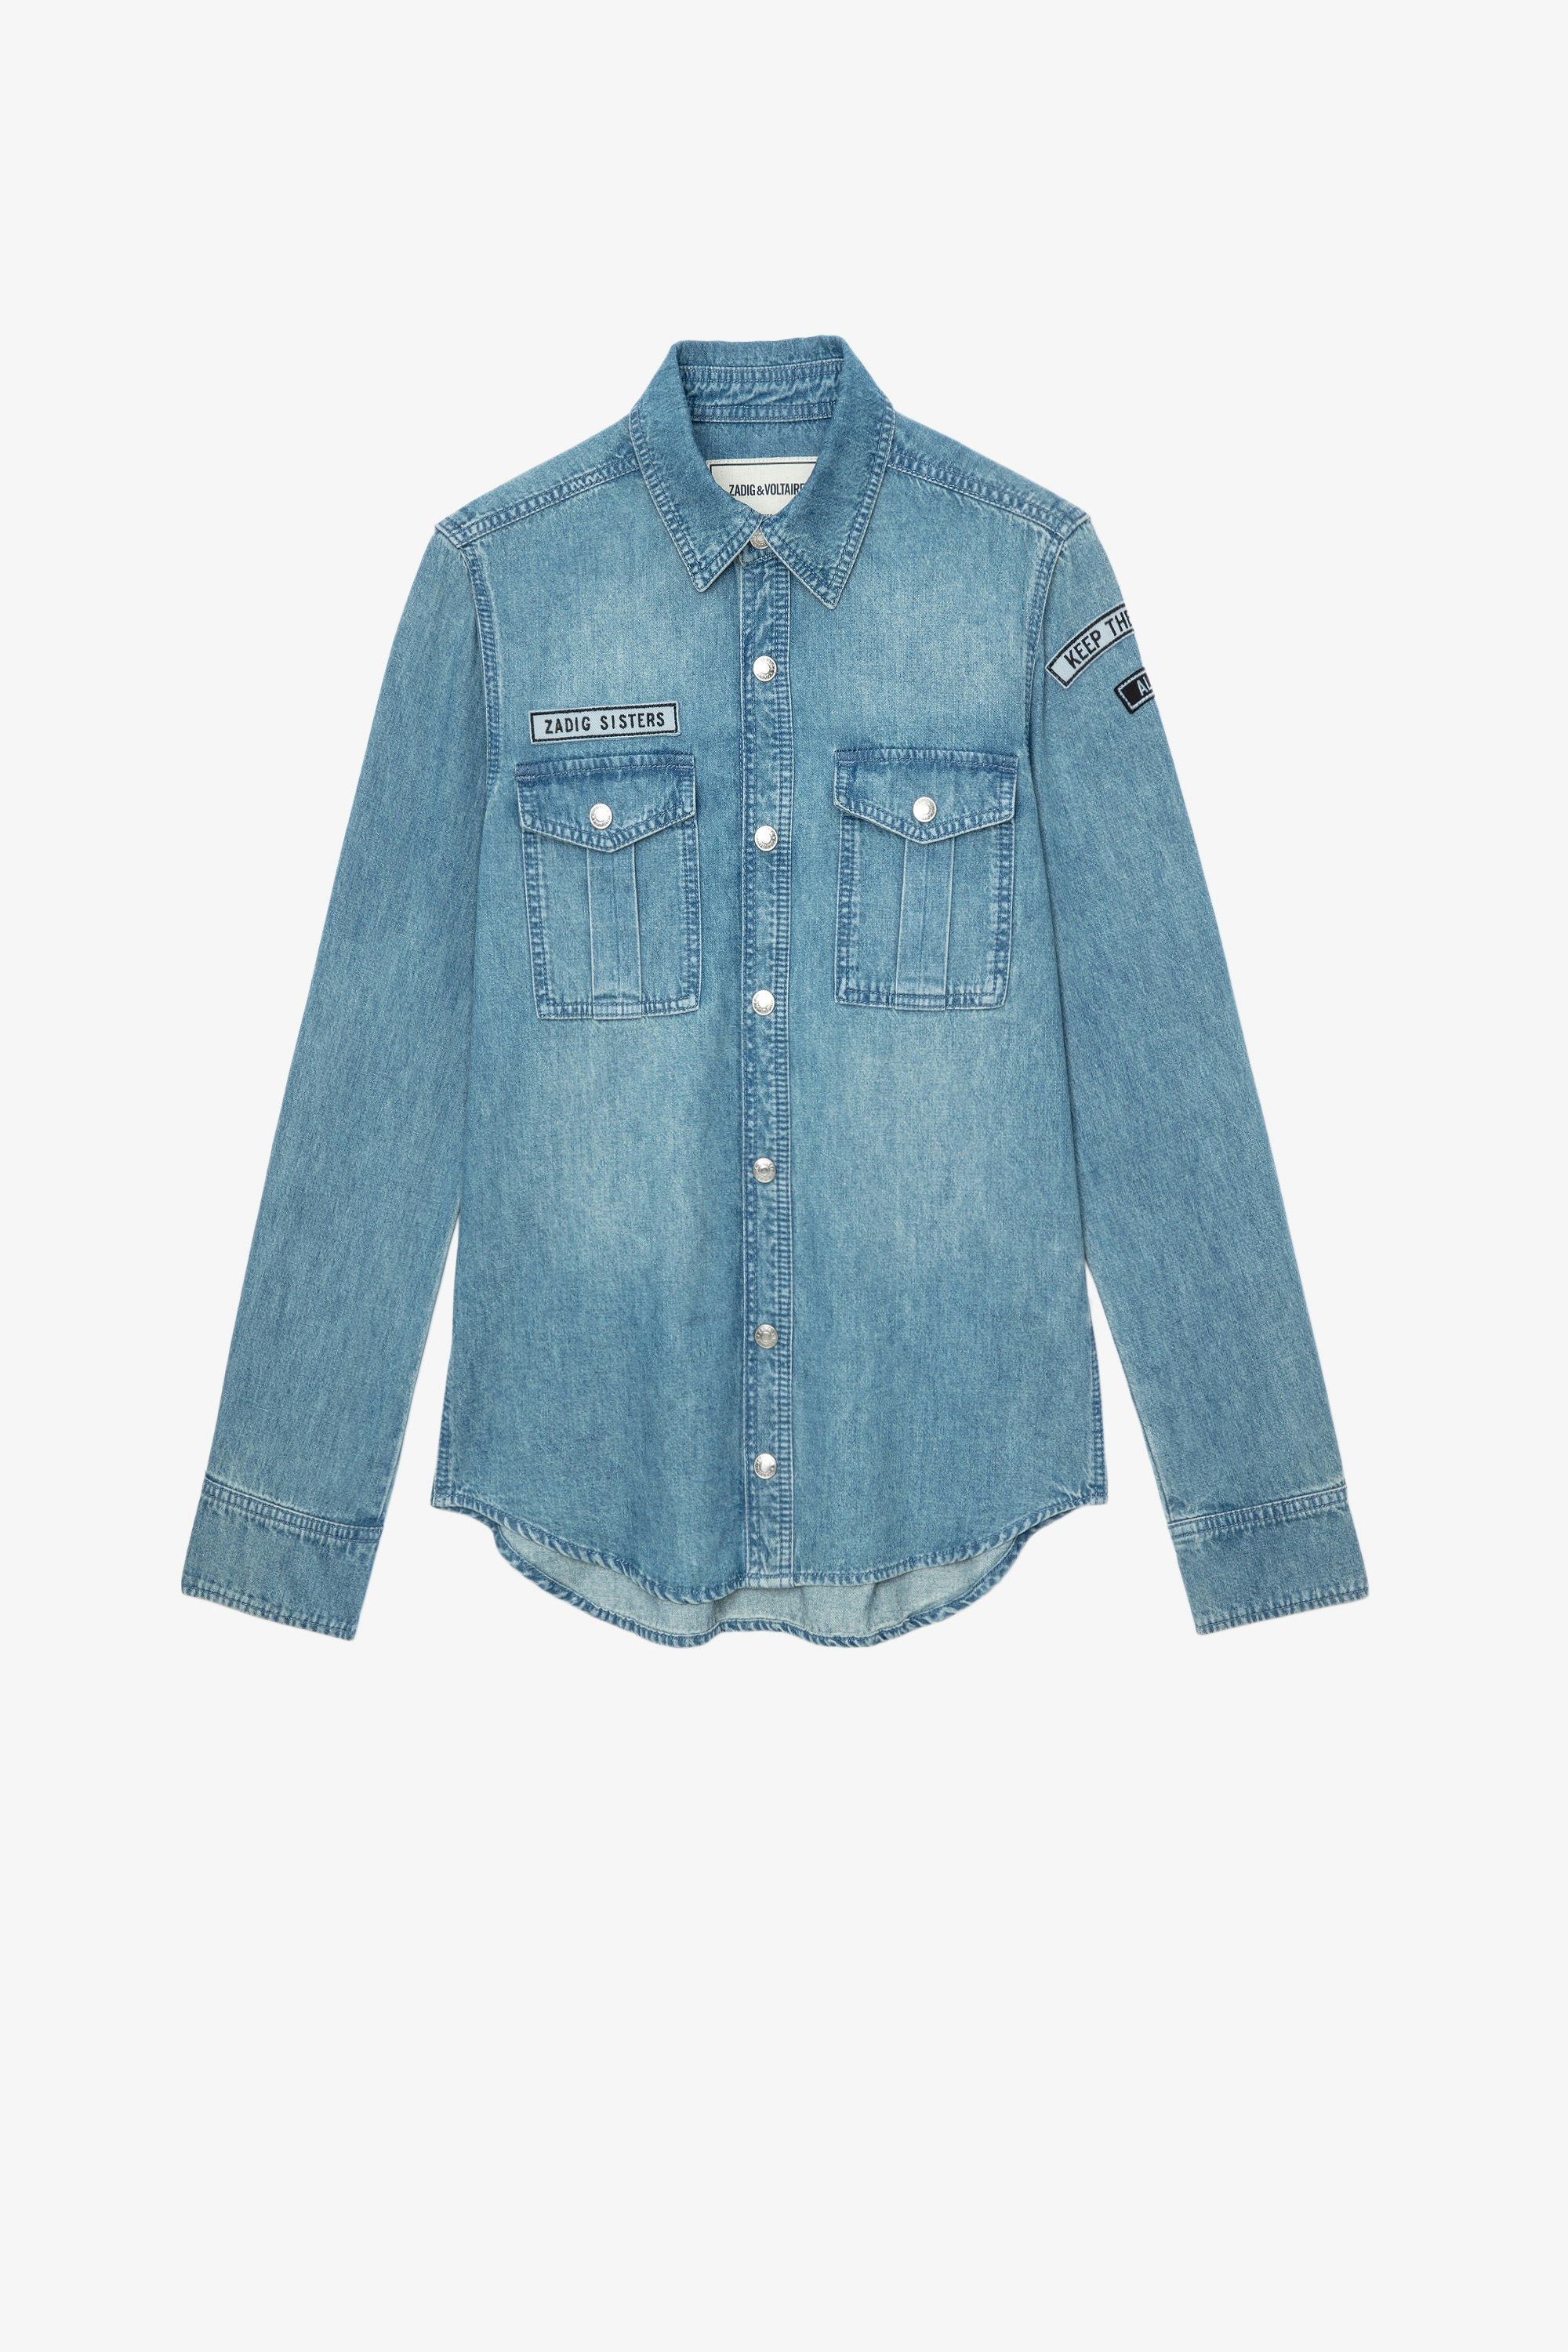 This デニム シャツ Zadig Sister women’s sky blue denim shirt with patch snap buttons